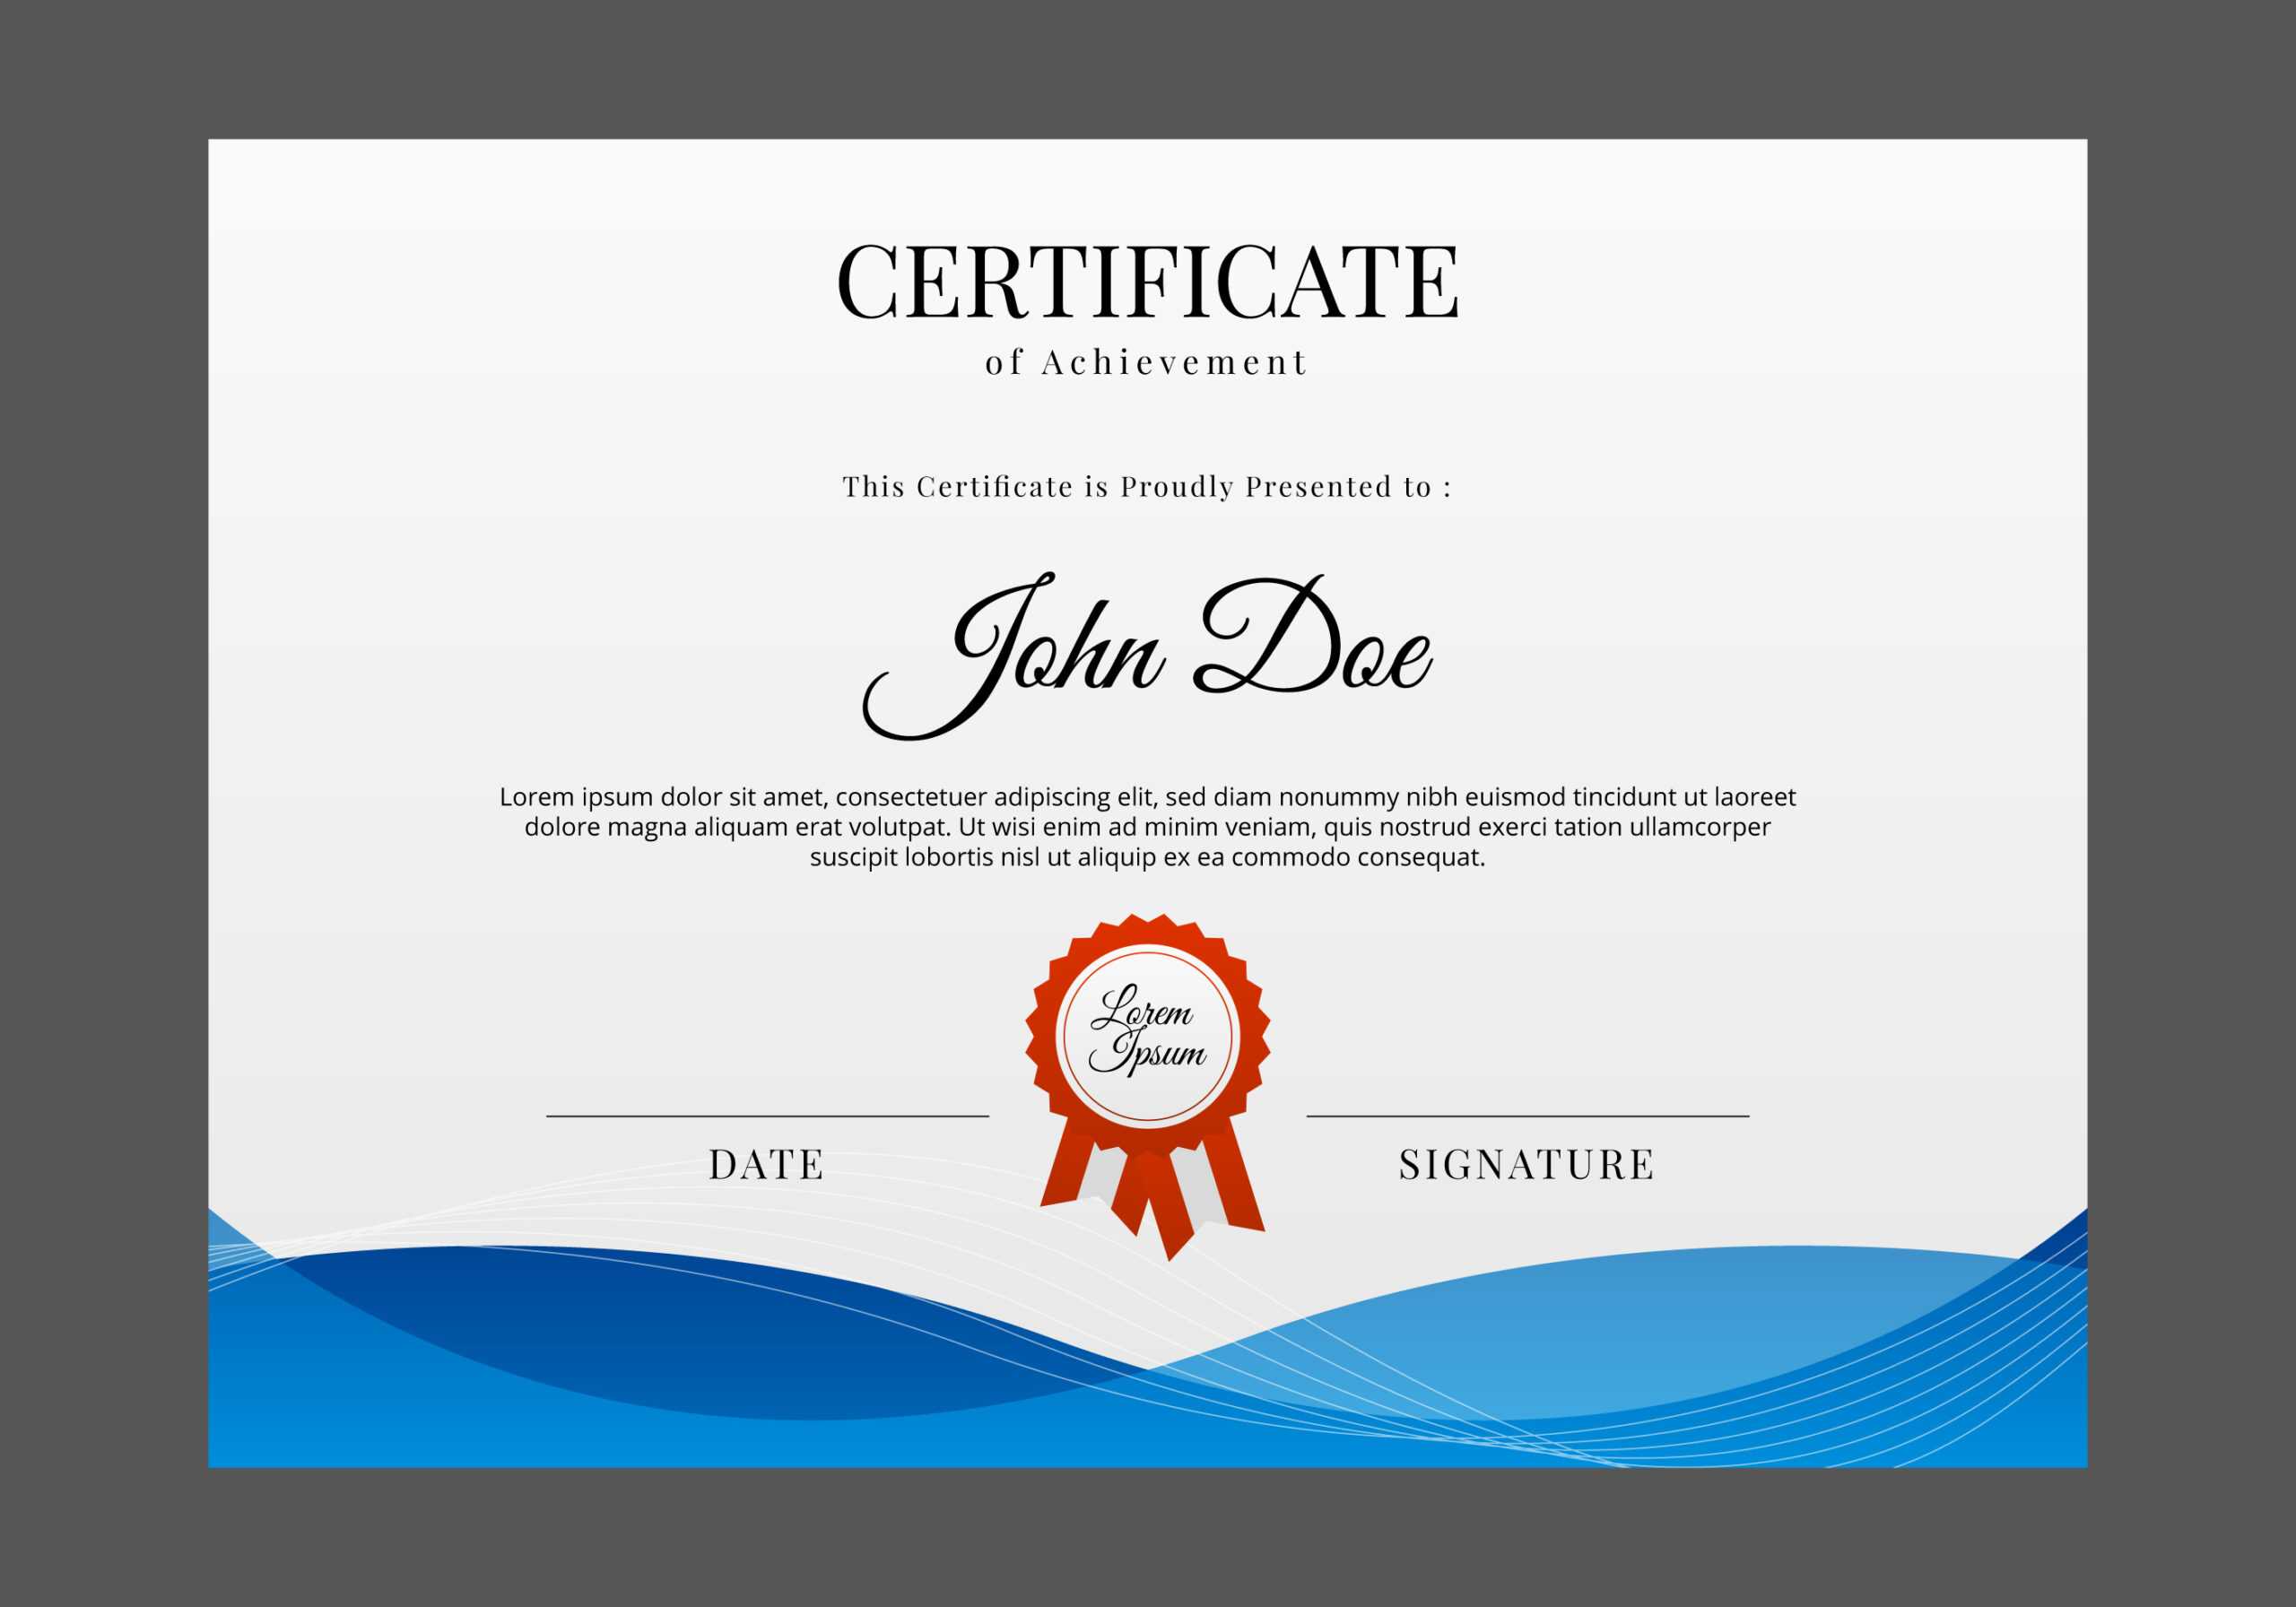 Certificate Templates, Free Certificate Designs Within Landscape Certificate Templates